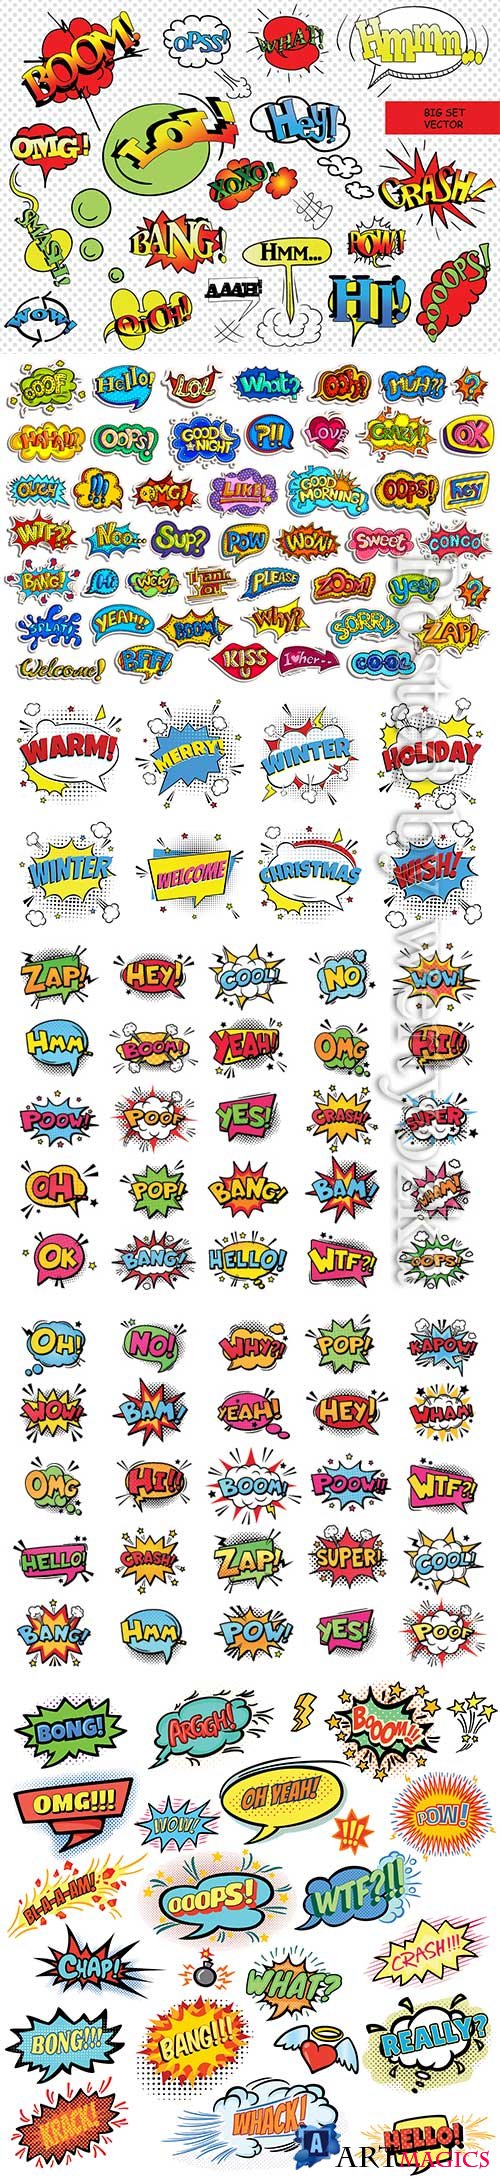 Sticker collection for comic style chat bubble for different word